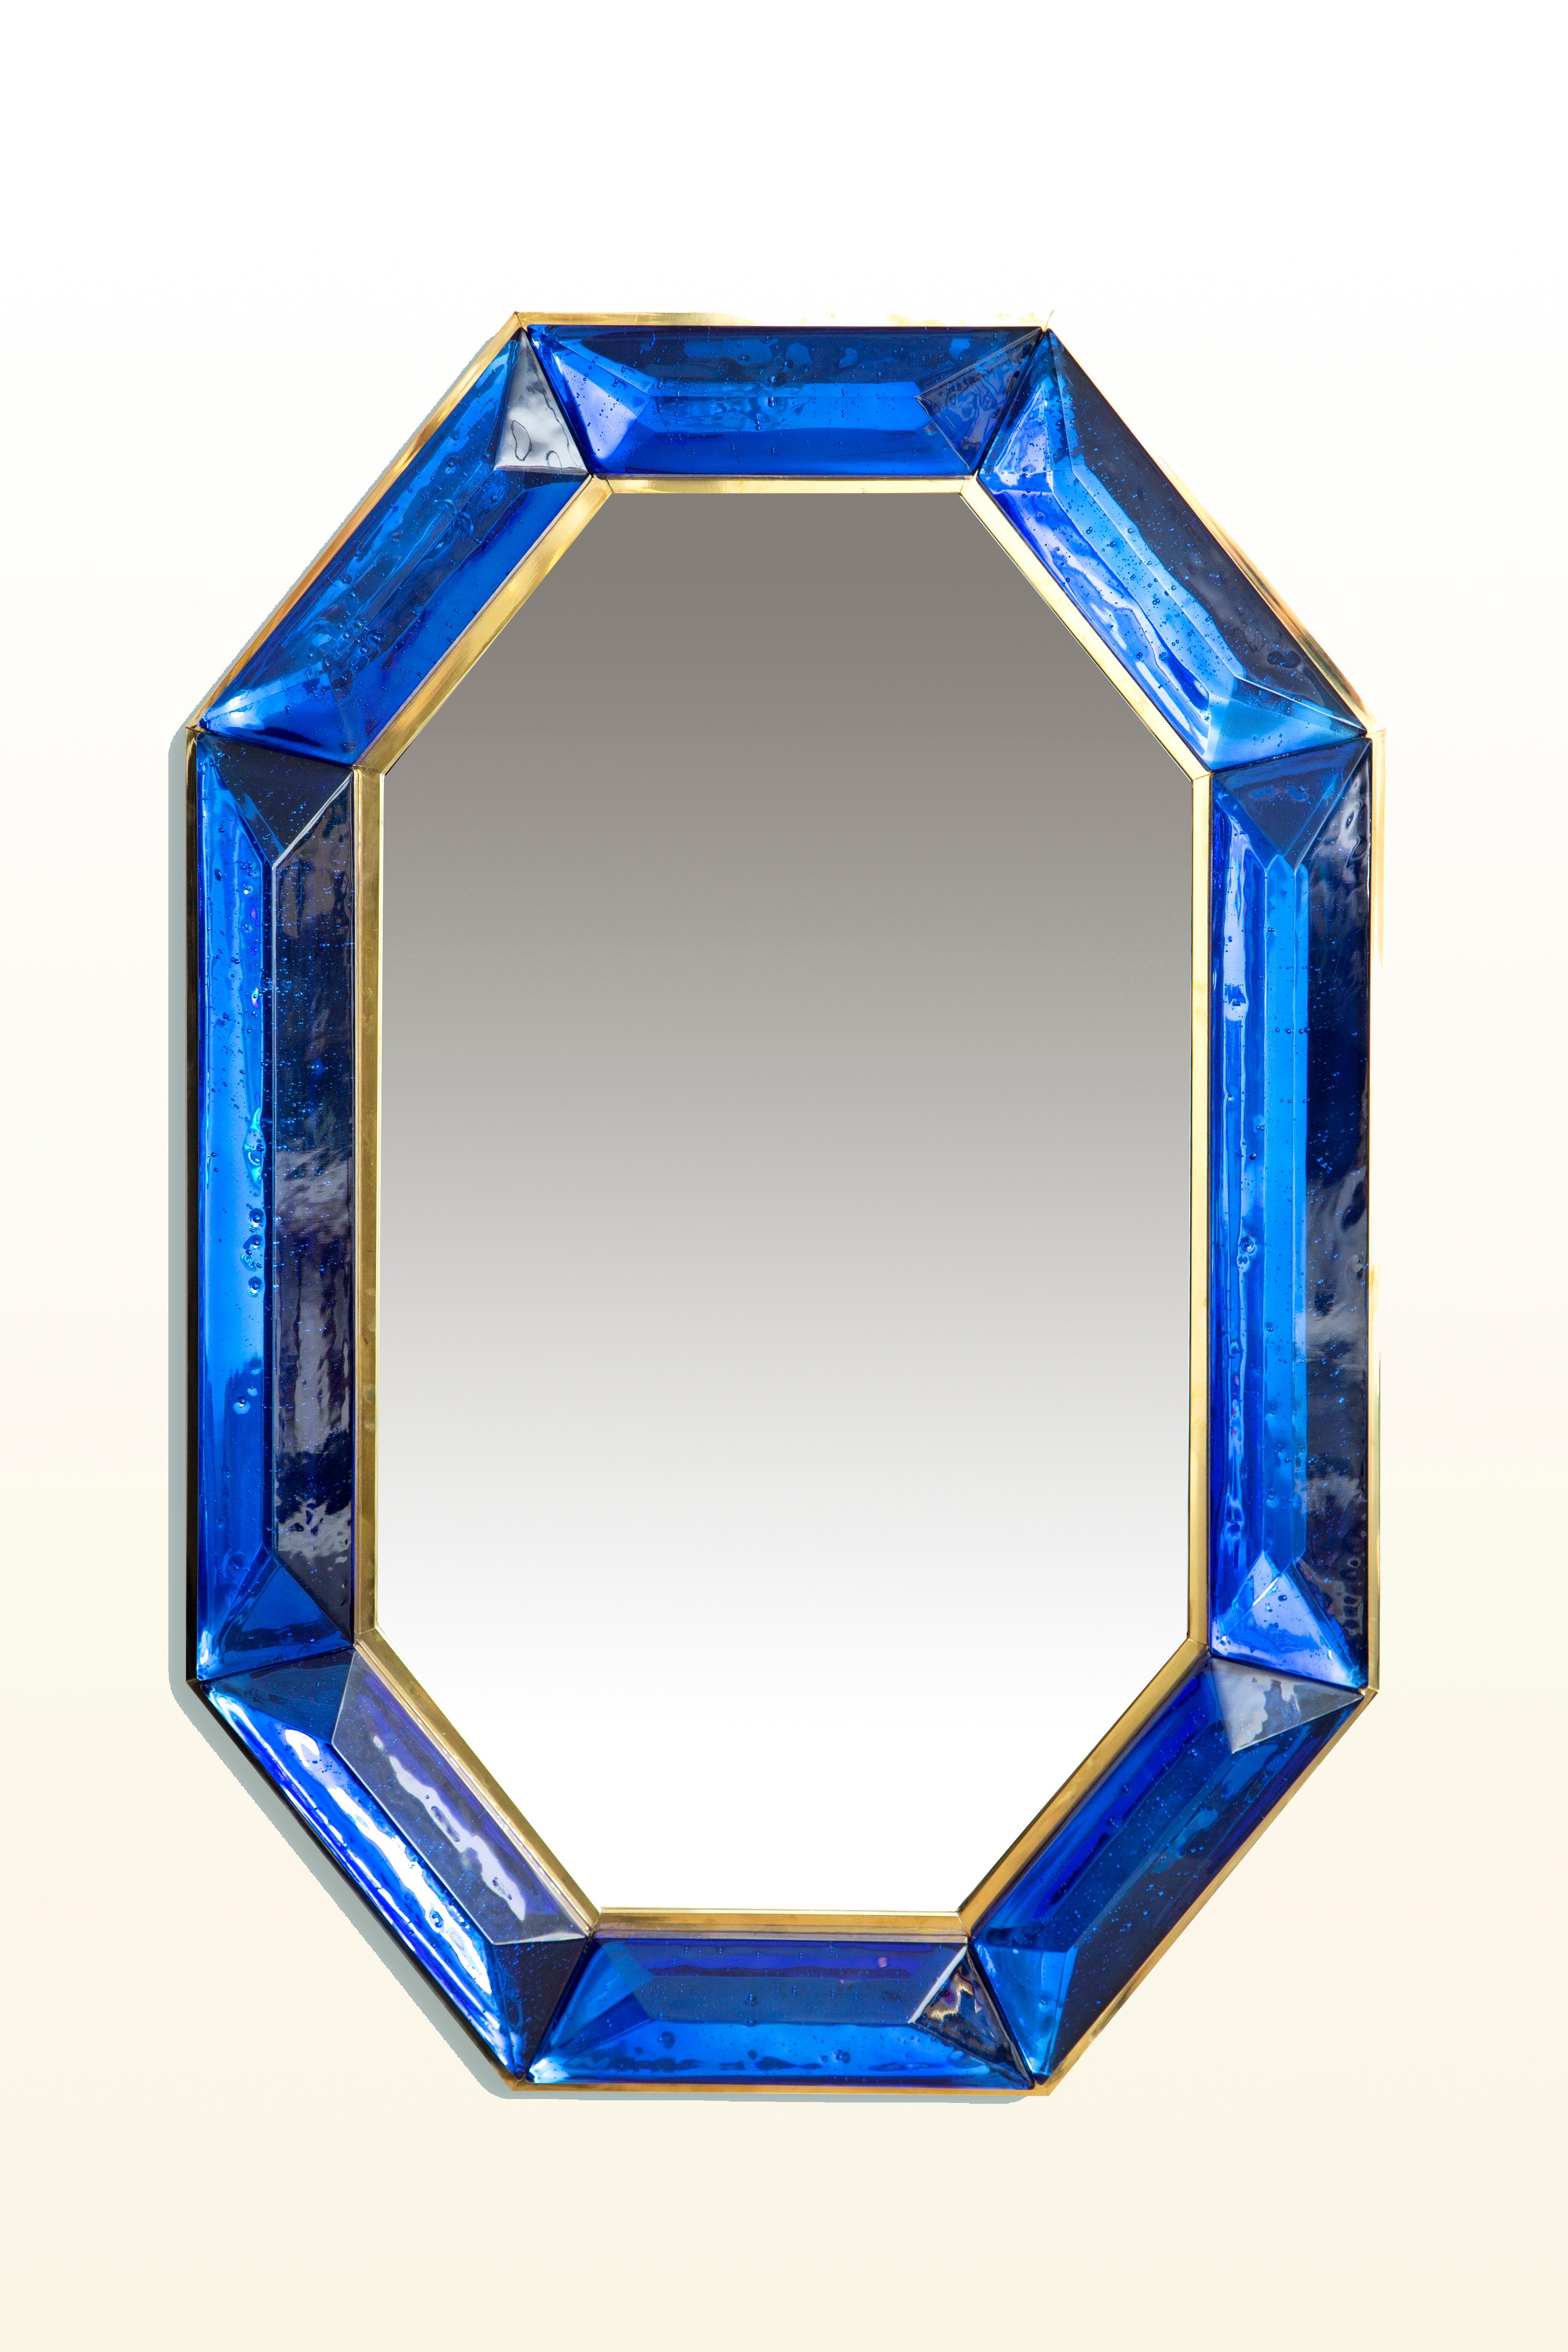 Bespoke octagon cobalt blue Murano glass mirror, in stock
 Vivid and intense cobalt blue glass block with naturally occurring air inclusions throughout 
 Highly polished faceted pattern
 Brass gallery all around
 Each mirror is a unique luxury